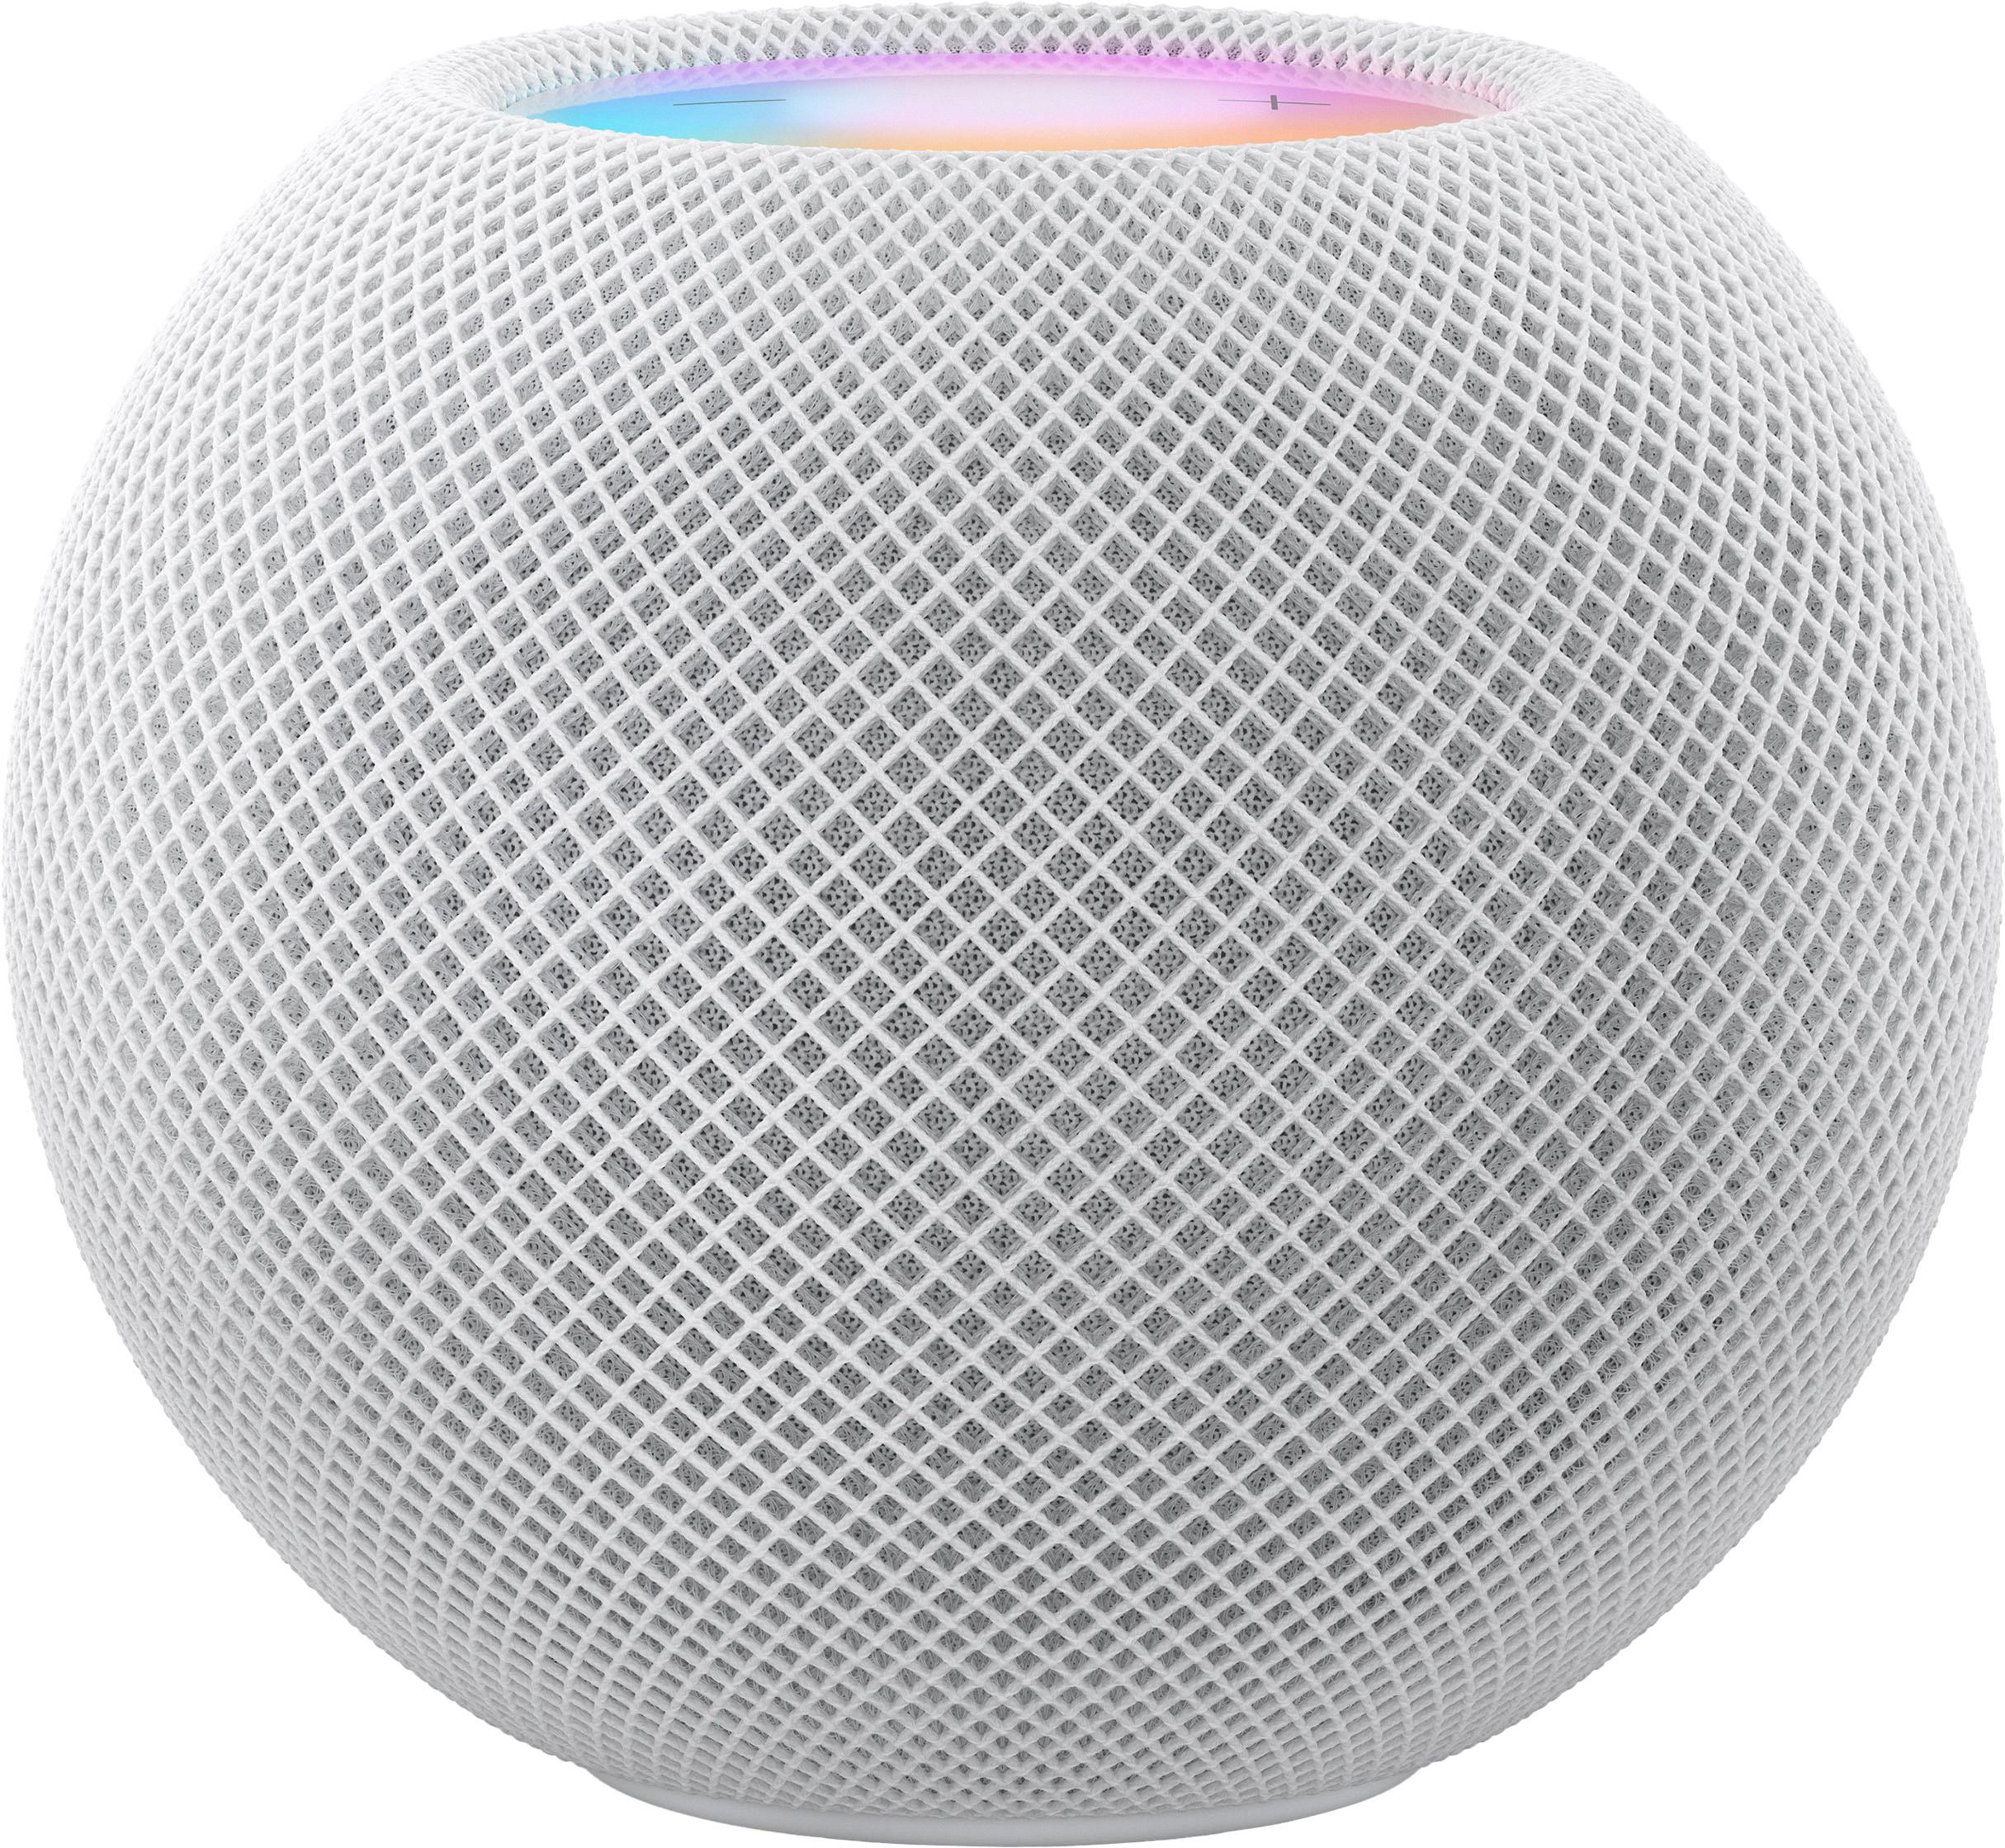 How To Connect Homepod To Apple Home App 7